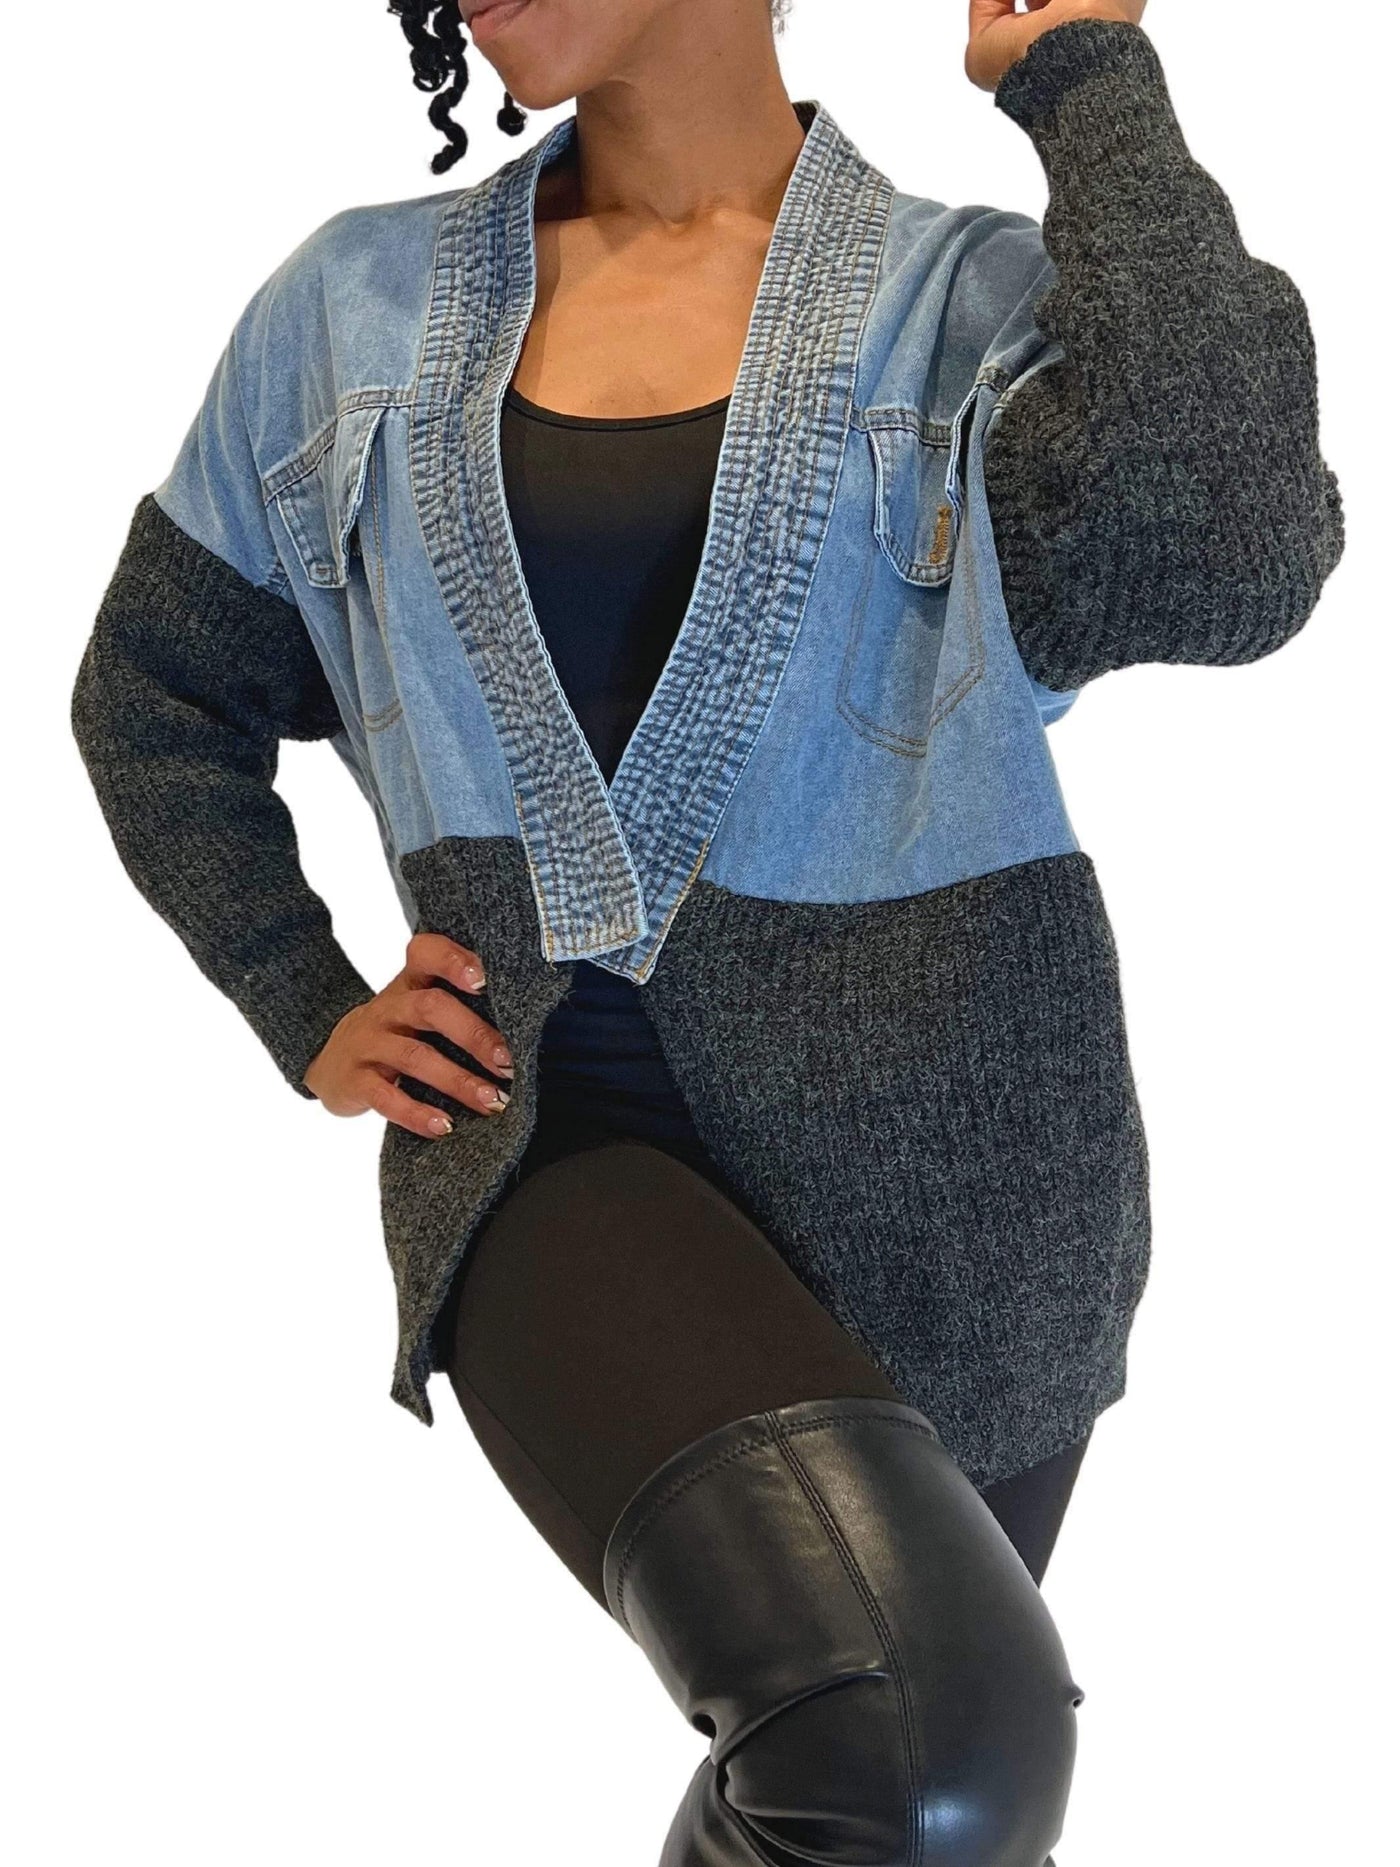 Half and Half | Denim Cardigan Jacket SIZE SMALL - Statement Piece NY _tab_final-sale, _tab_size-chart, Black, bomber, bomber jacket, Brooklyn Boutique, chic, cute jackets, denim cardigan, Fall, Fall Fashion, final sale, jacket, Long Sleeve, Misses, not clearance, Ships from USA, SPNY Exclusive, Standard Fall, statement, Statement Clothing, statement piece, Statement Piece Boutique, statement piece ny, Statement Pieces, Statement Pieces Boutique, Women's Boutique Statement Outerwear